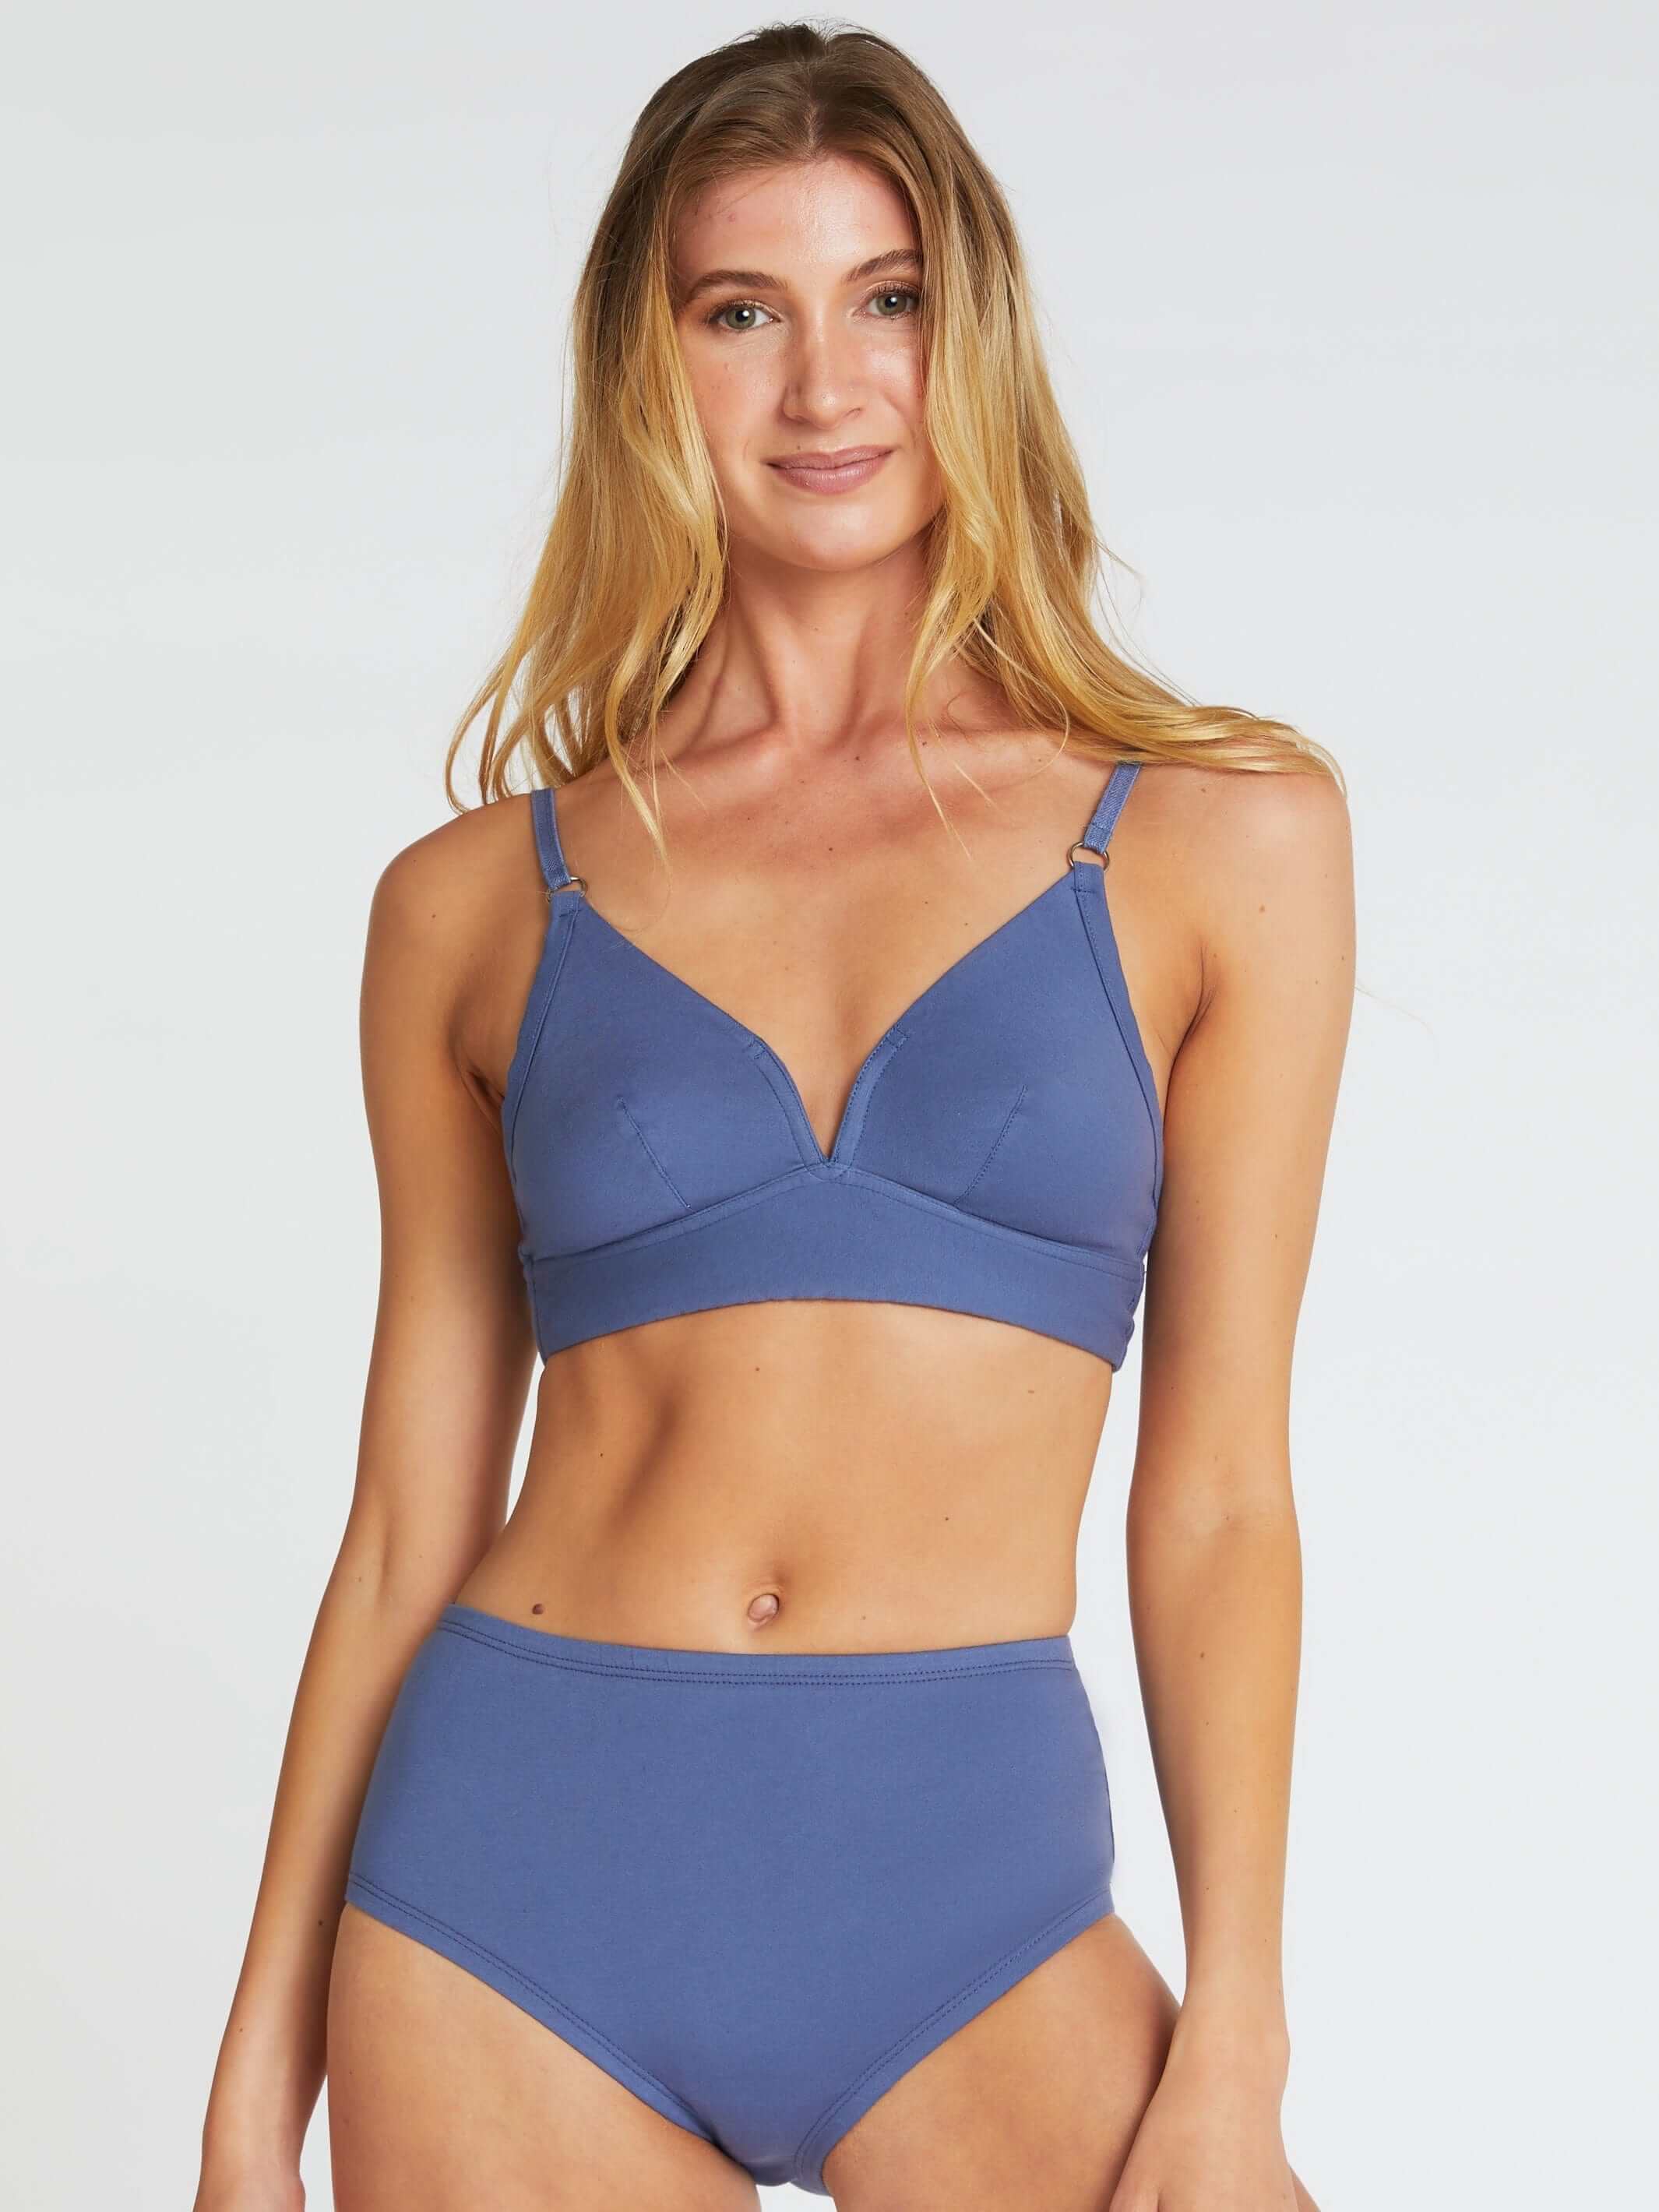 woman wearing blue bra with matching high waisted briefs in organic cotton